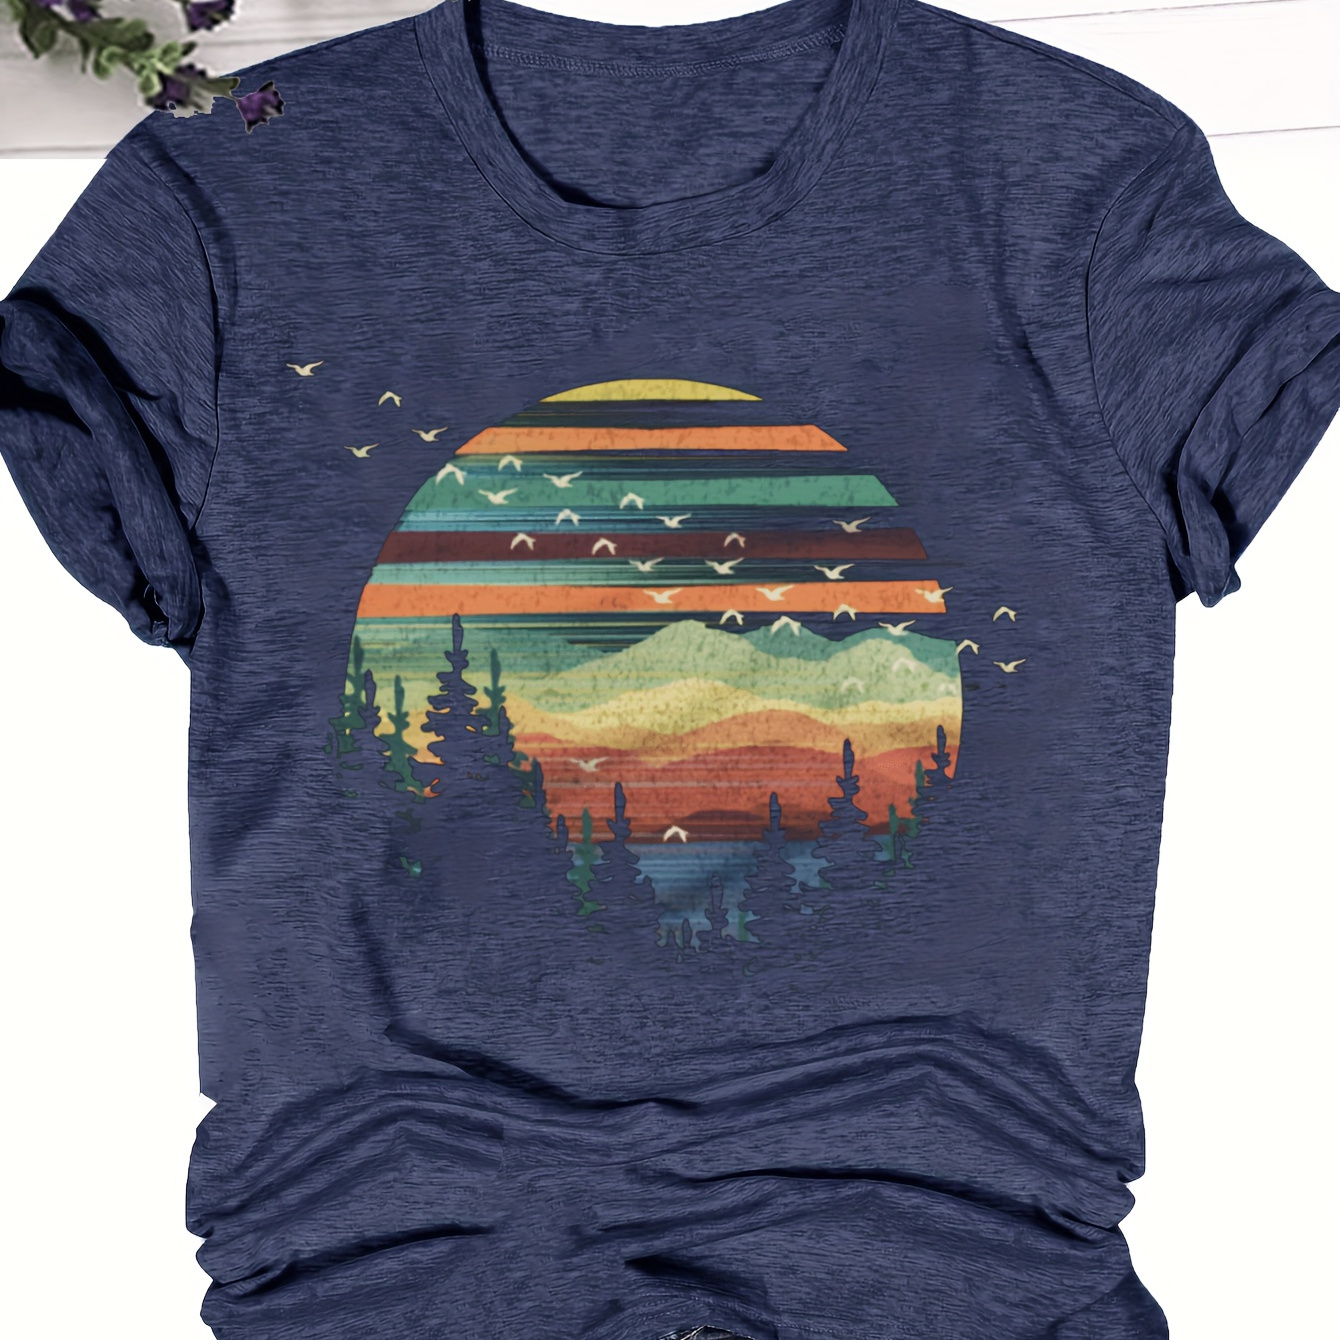 

Mountain Print T-shirt, Casual Short Sleeve Crew Neck Top For Spring & Summer, Women's Clothing